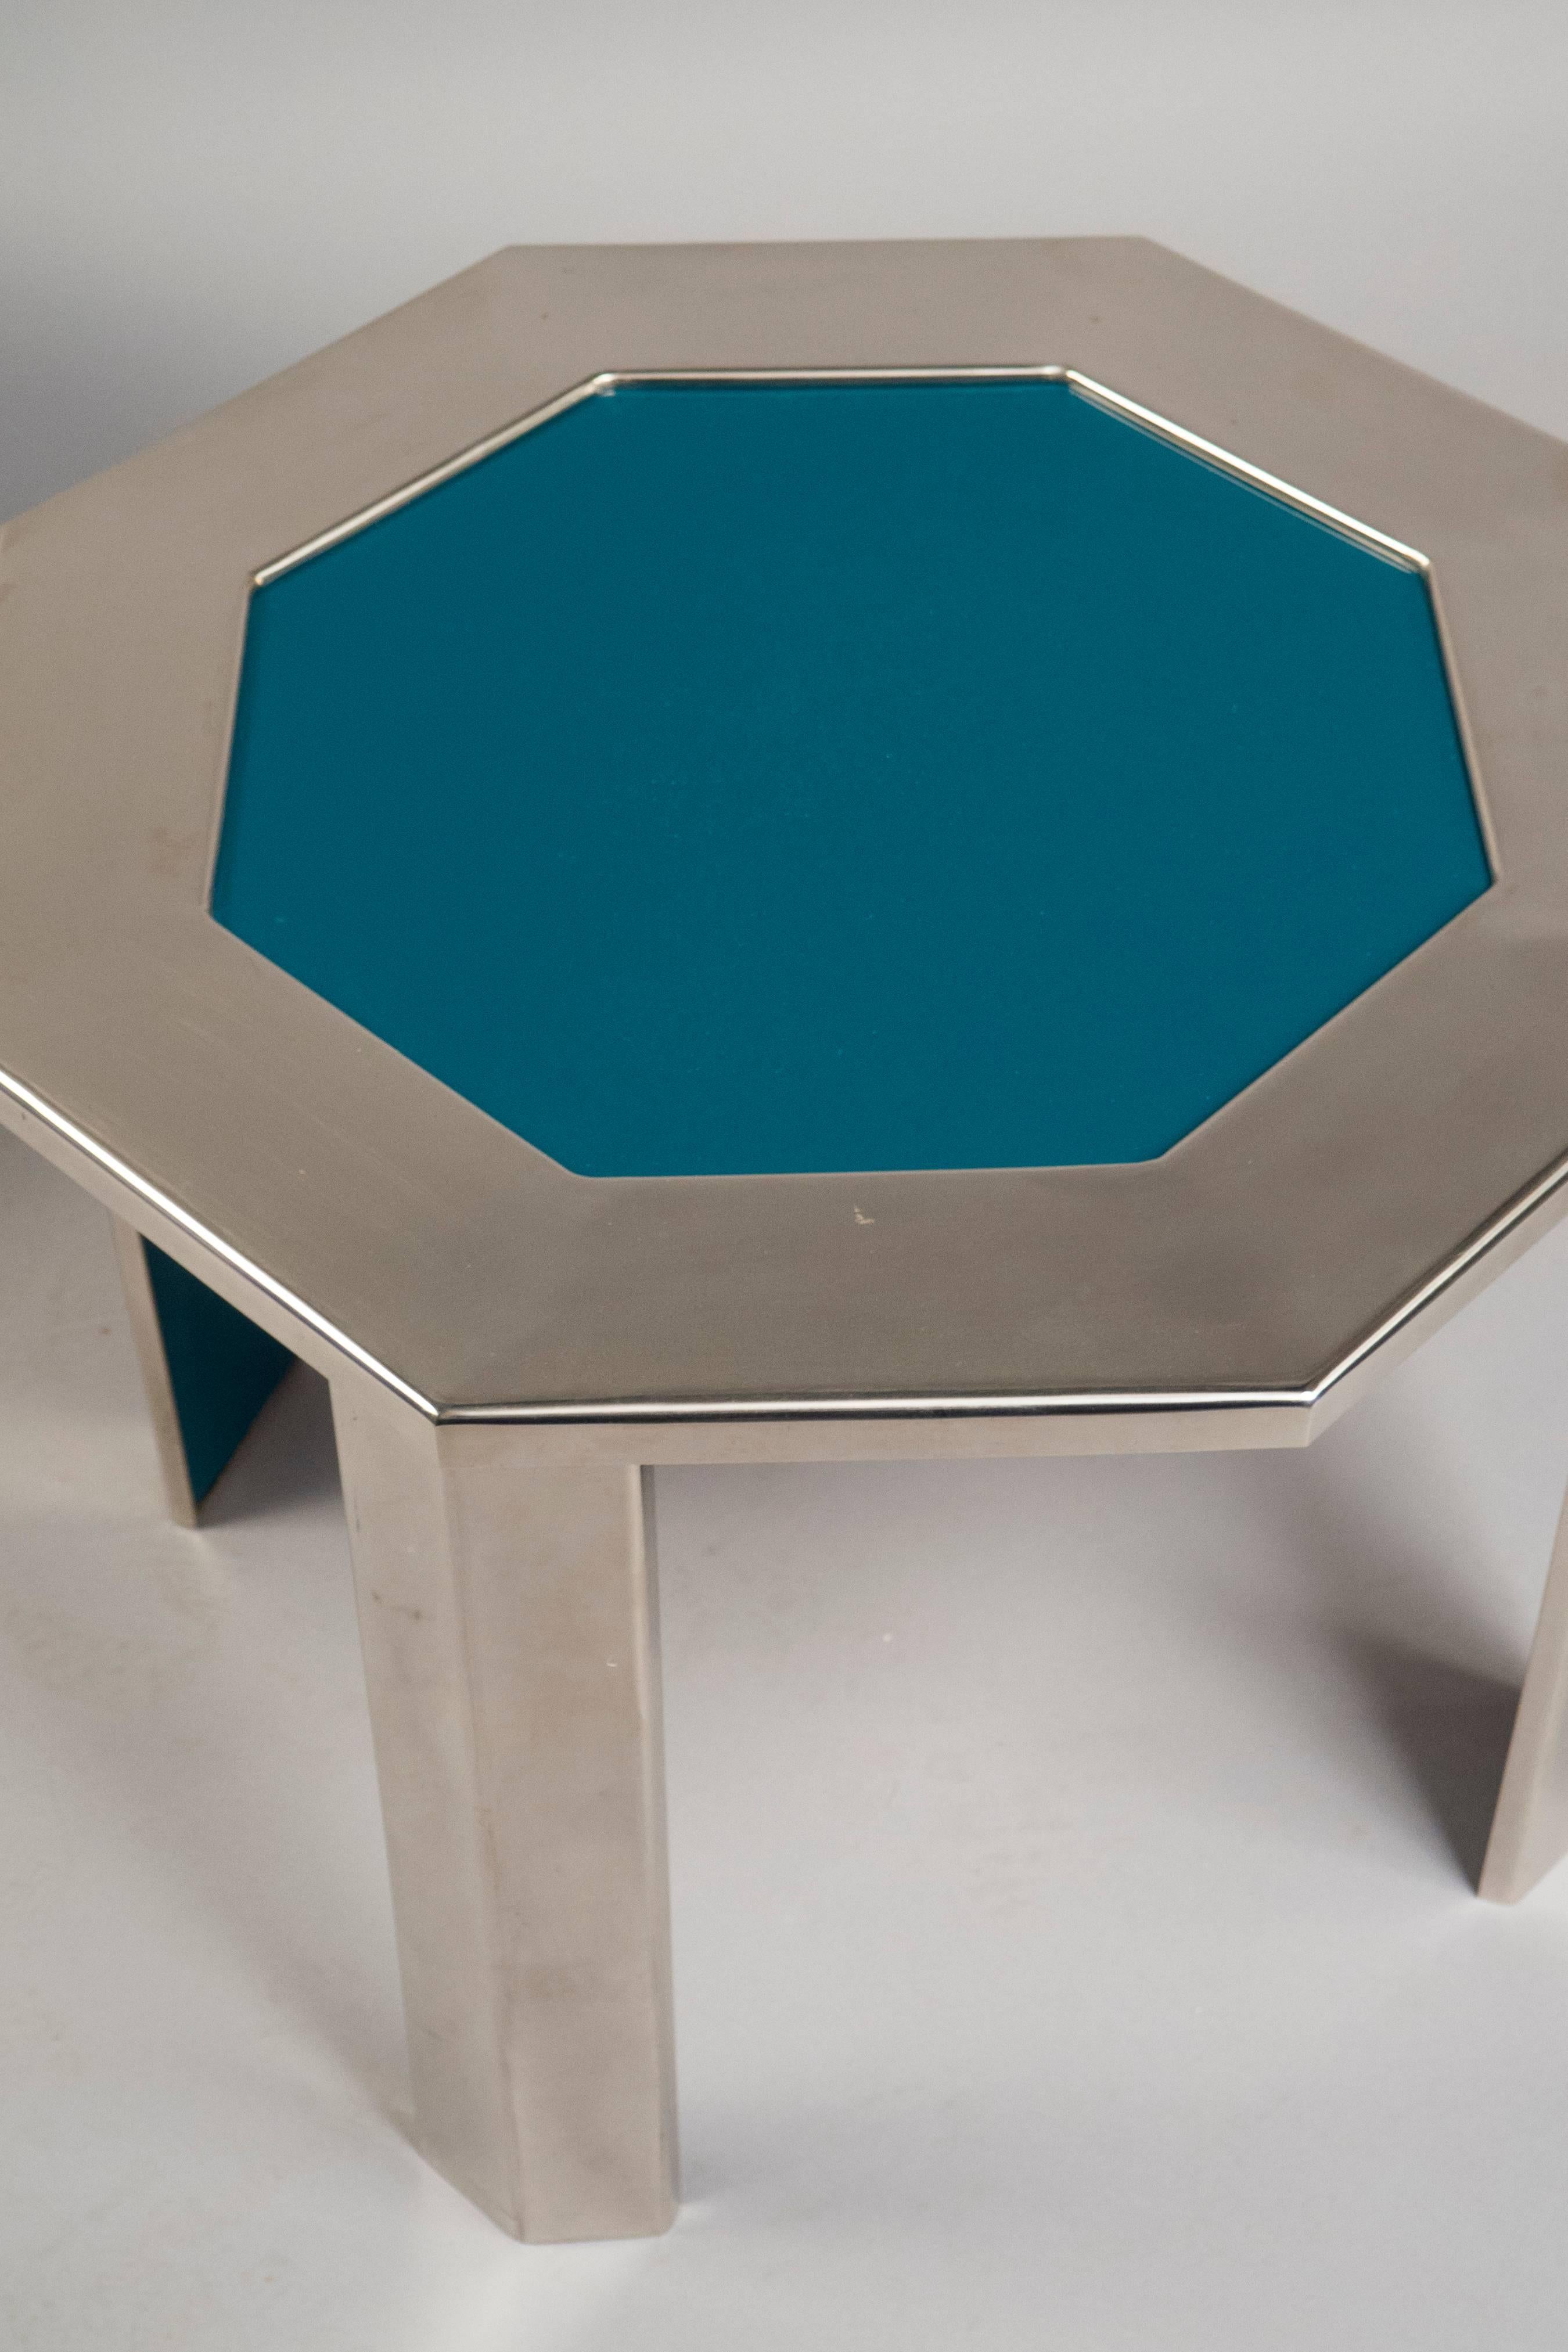 Octagonal nickeled steel frame tables, each top featuring a turquoise formica inlay. The insides of the legs are also covered in formica.